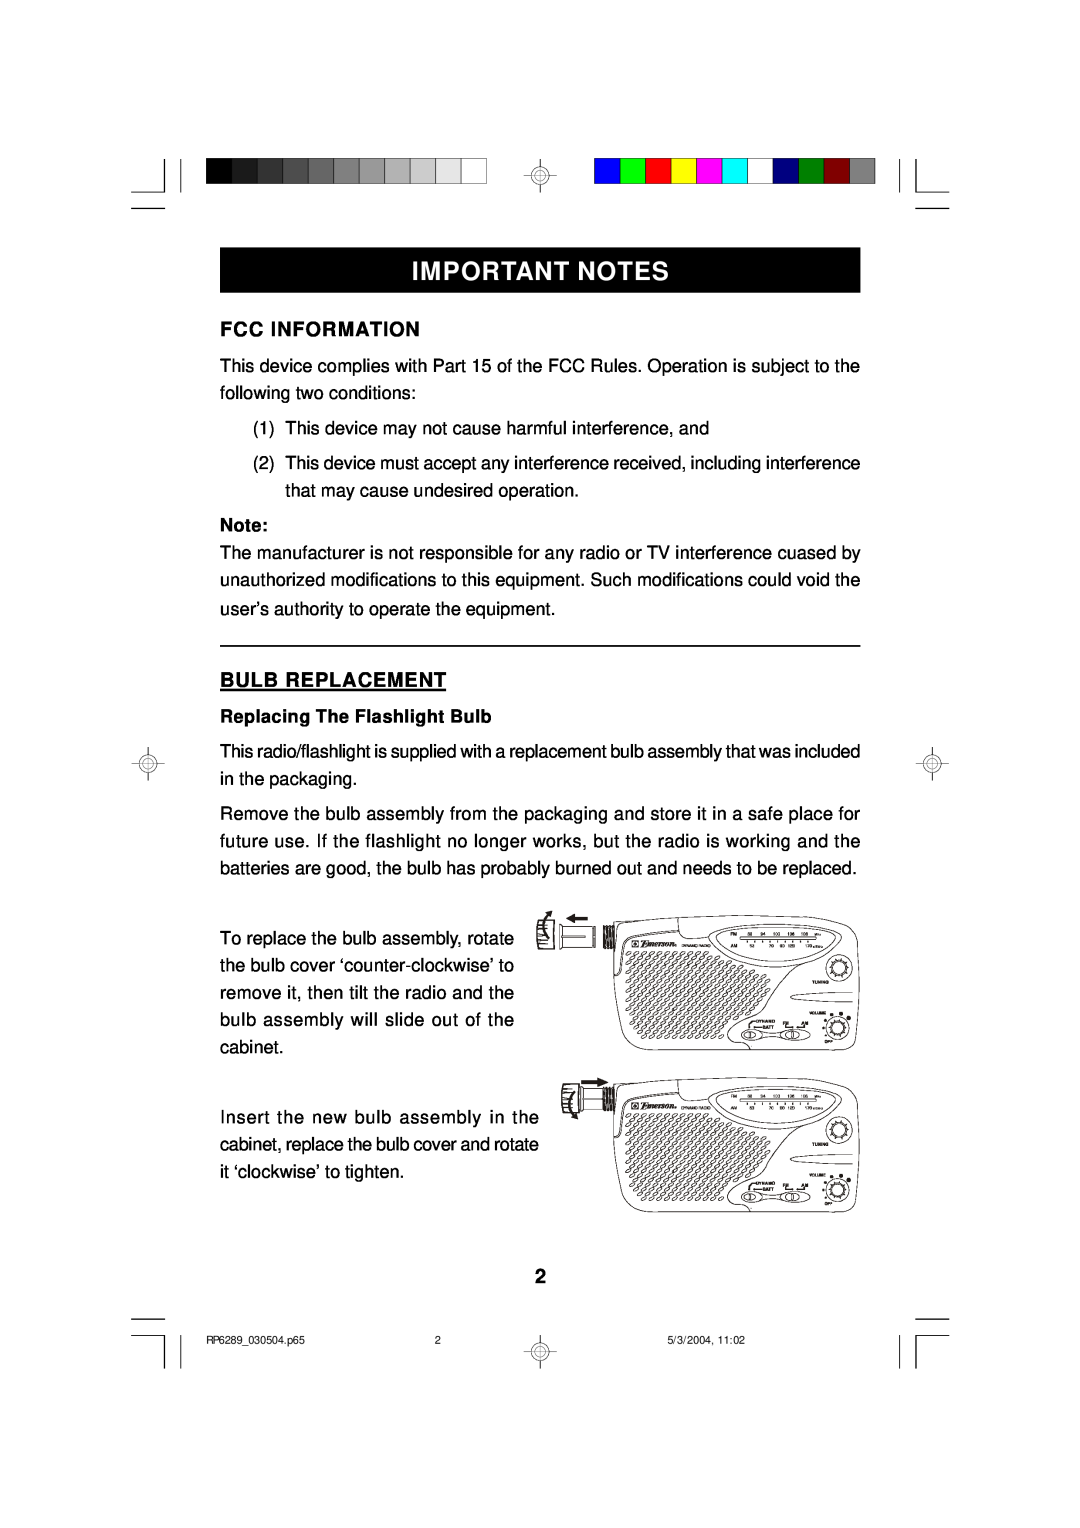 Emerson RP6289 owner manual Important Notes, Fcc Information, Bulb Replacement, Replacing The Flashlight Bulb 